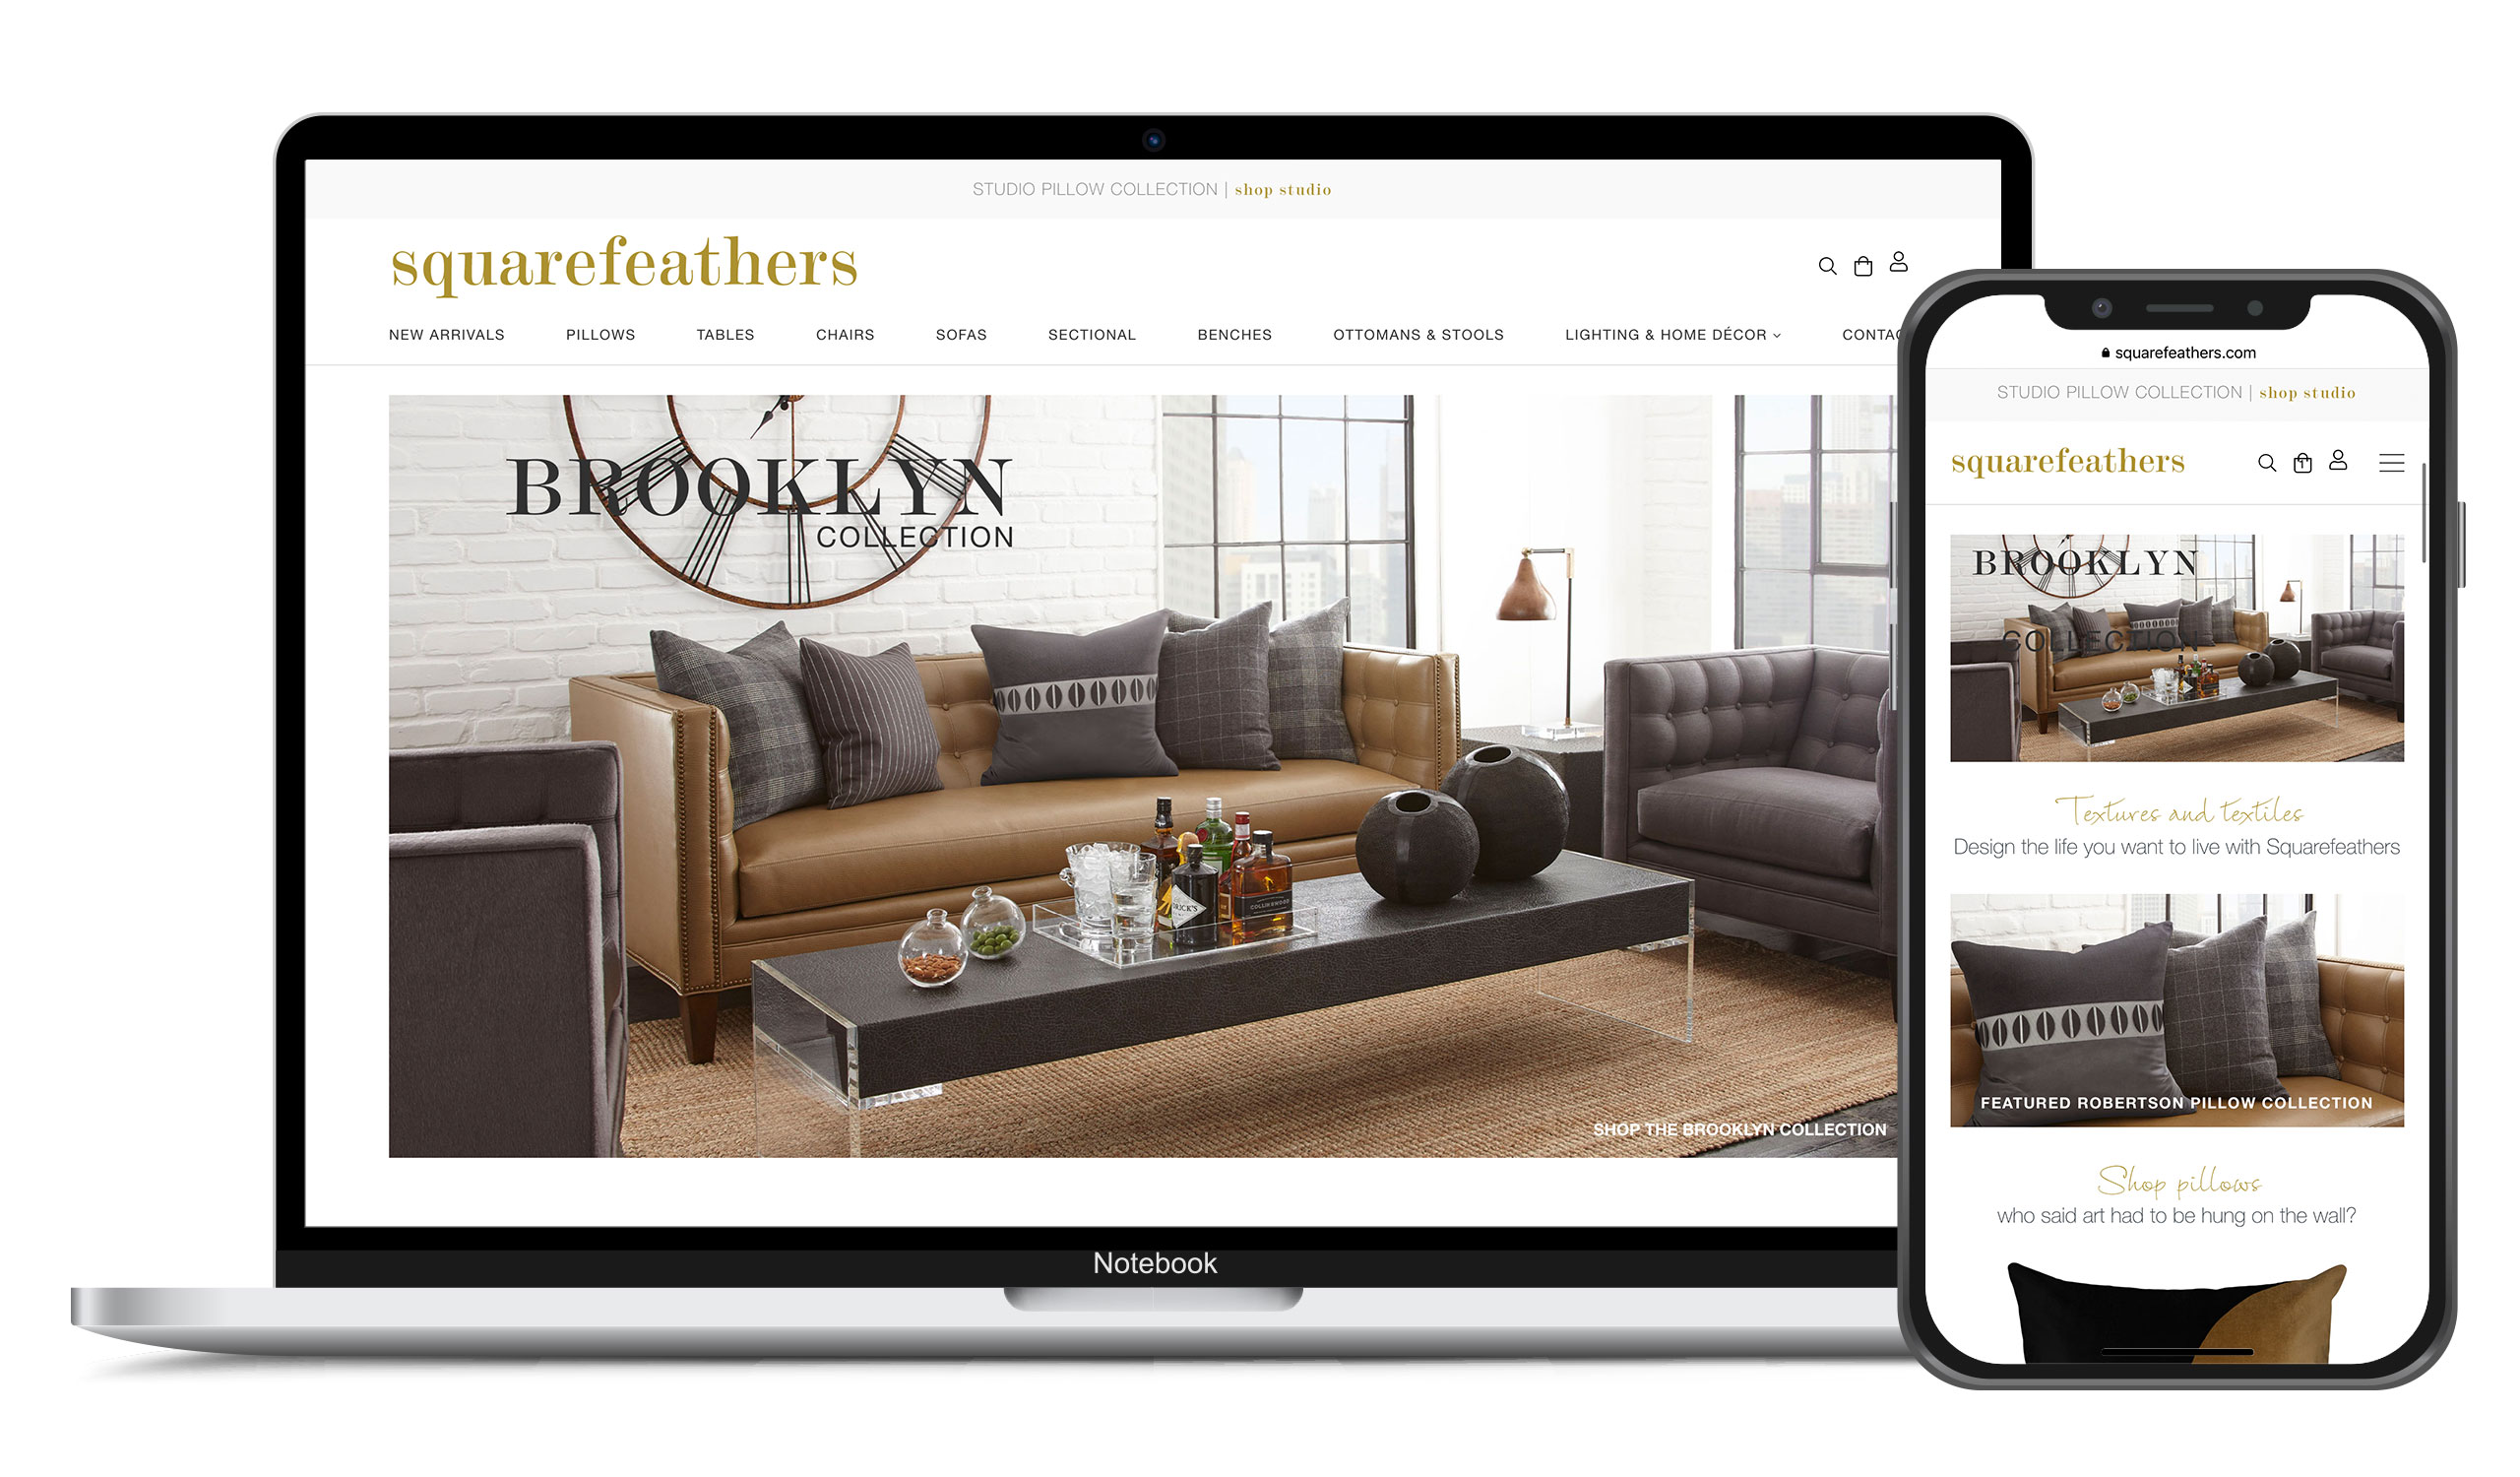 Laptop & iPhone Mockup of Squarefeathers website redesign